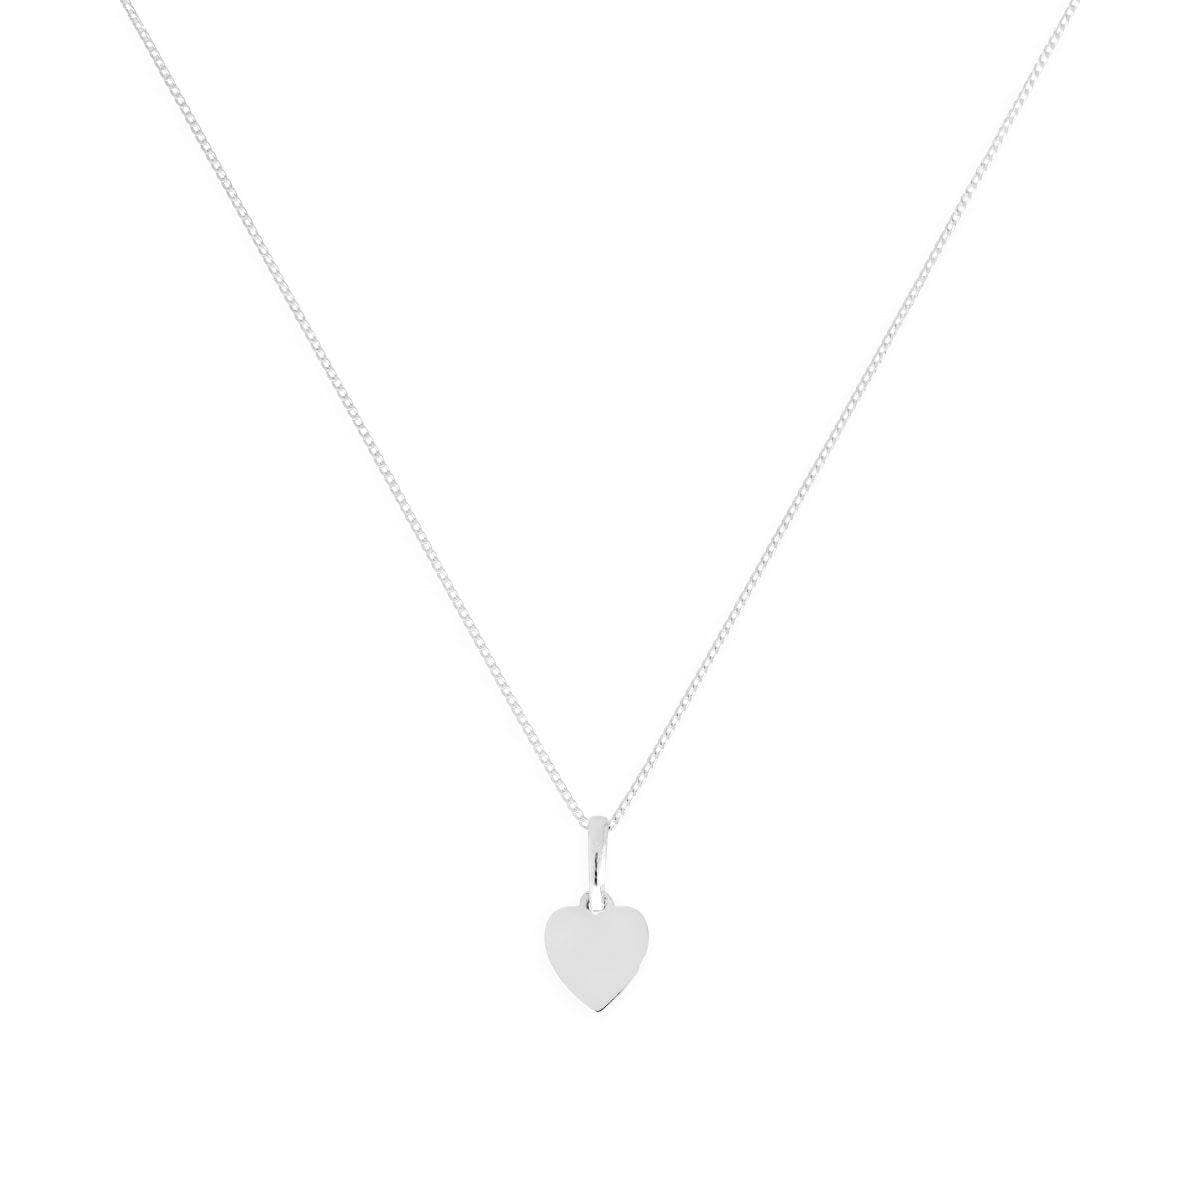 9ct White Gold Small Engravable Heart Pendant Necklace 16 - 20 Inches